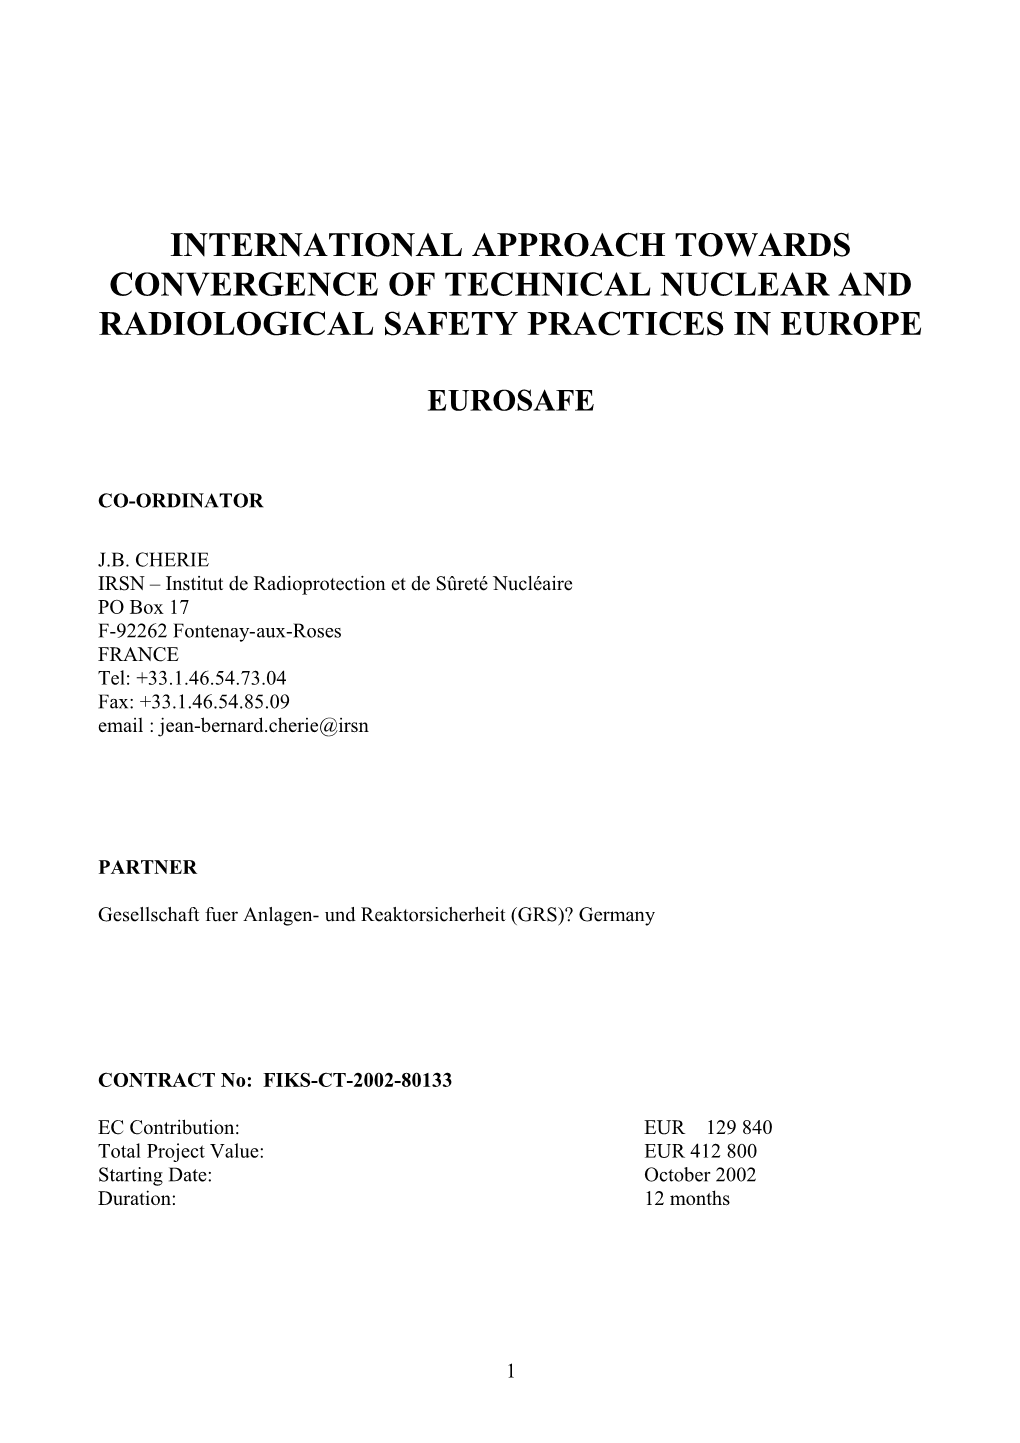 International Approach Towards Convergence of Technical Nuclear and Radiological Safety